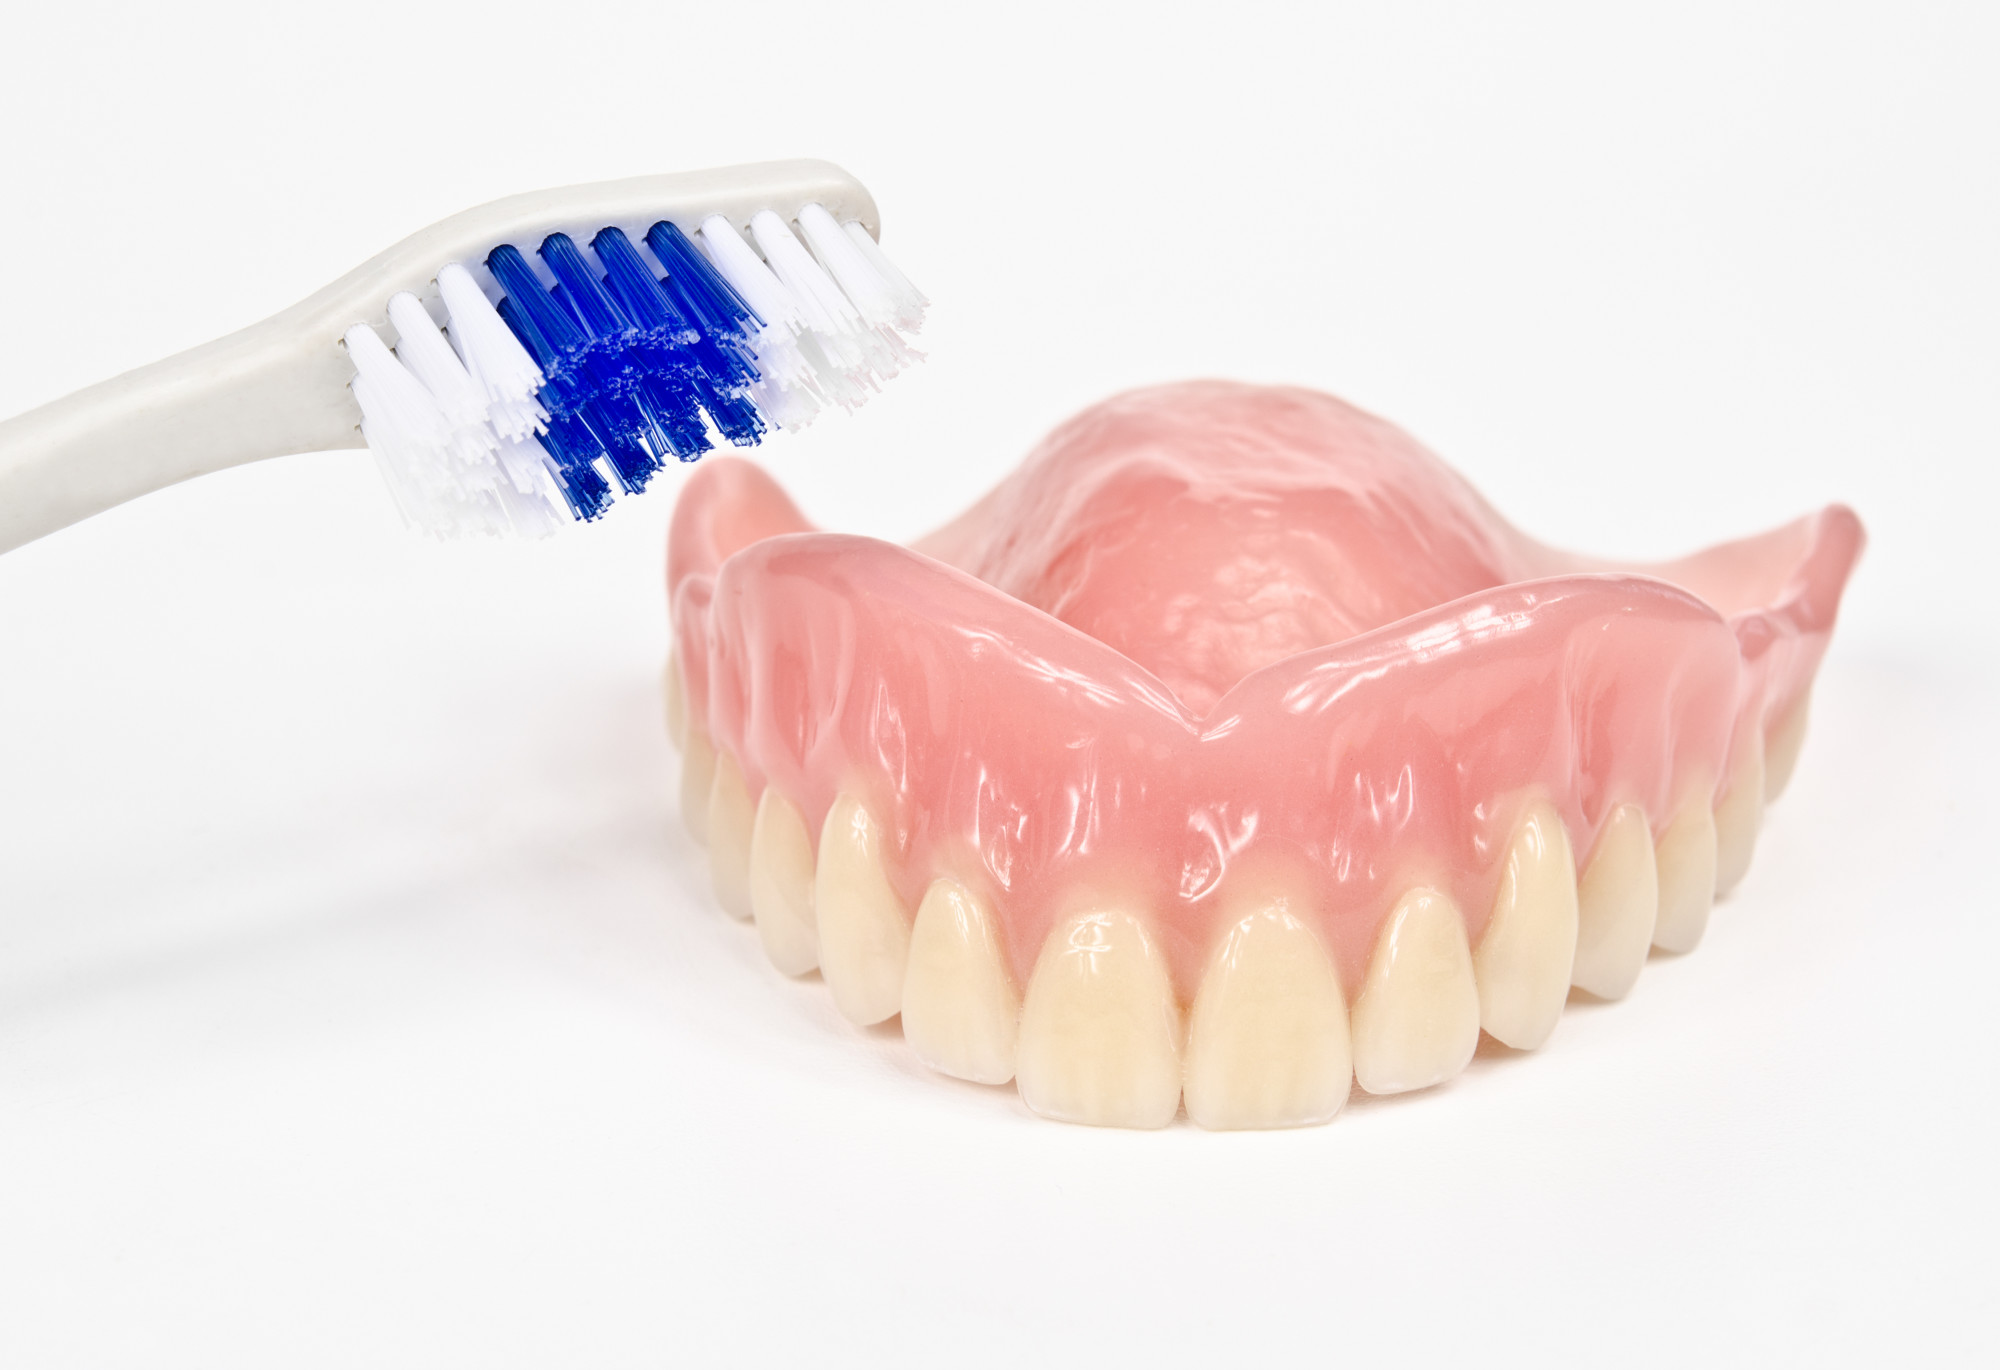 Denture Care: What Type of Toothbrush Should You Use to Clean Your Dentures?